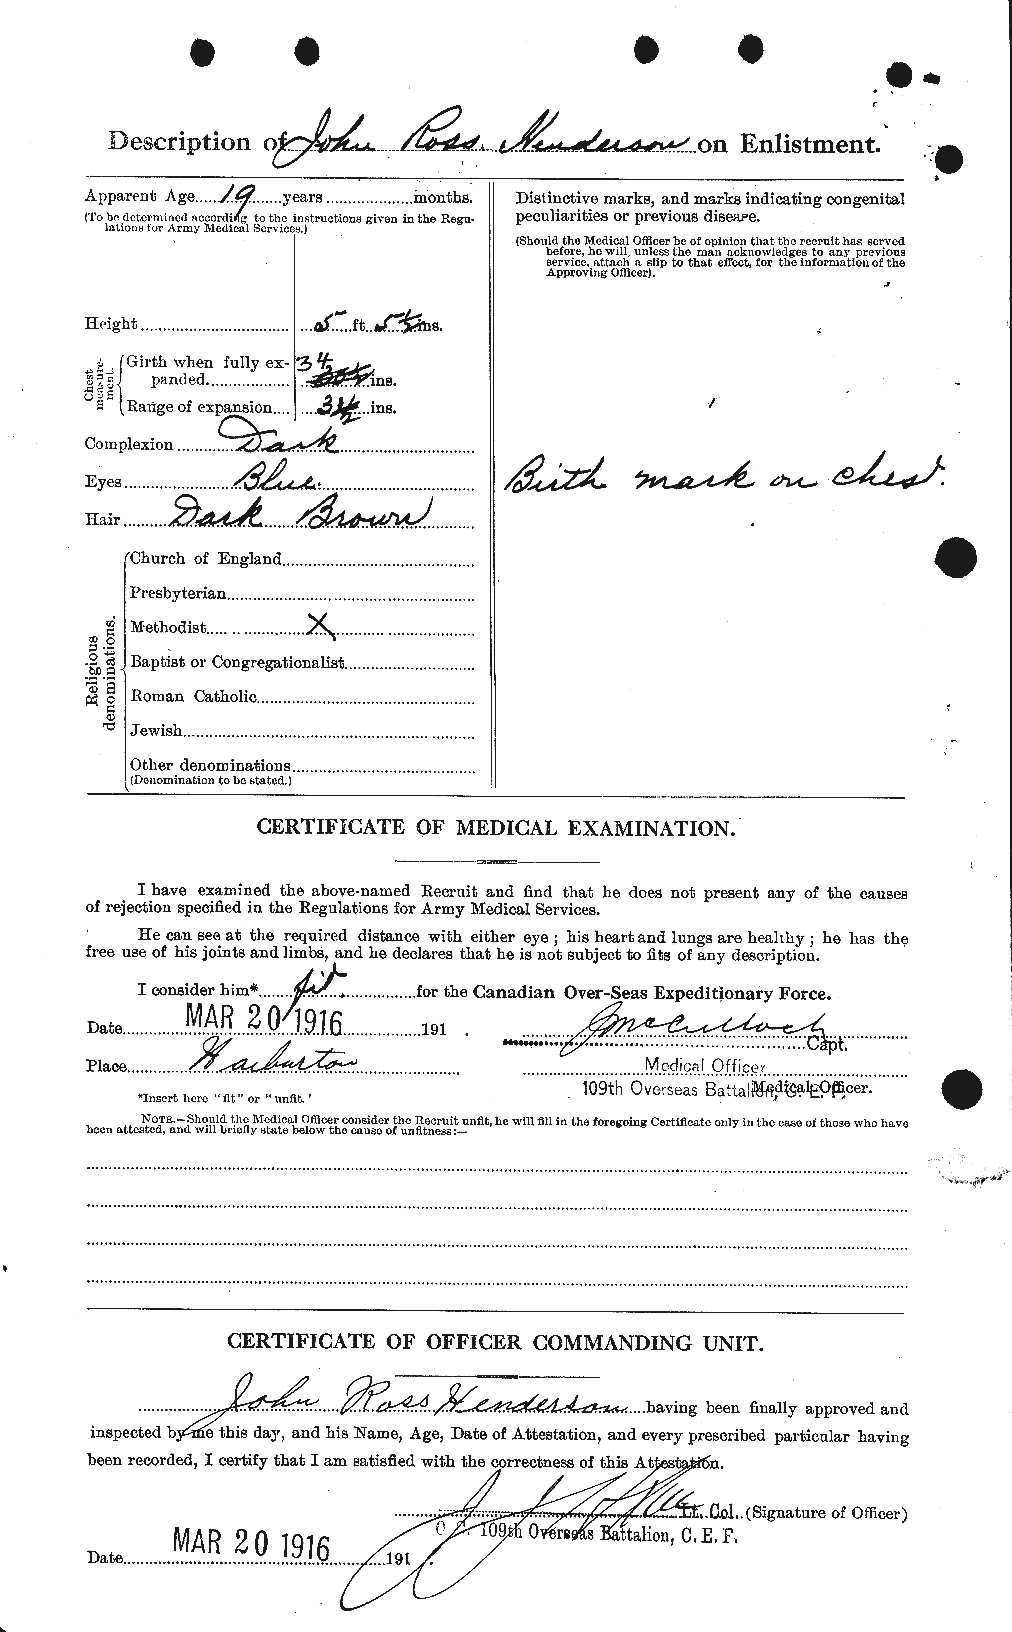 Personnel Records of the First World War - CEF 392554b